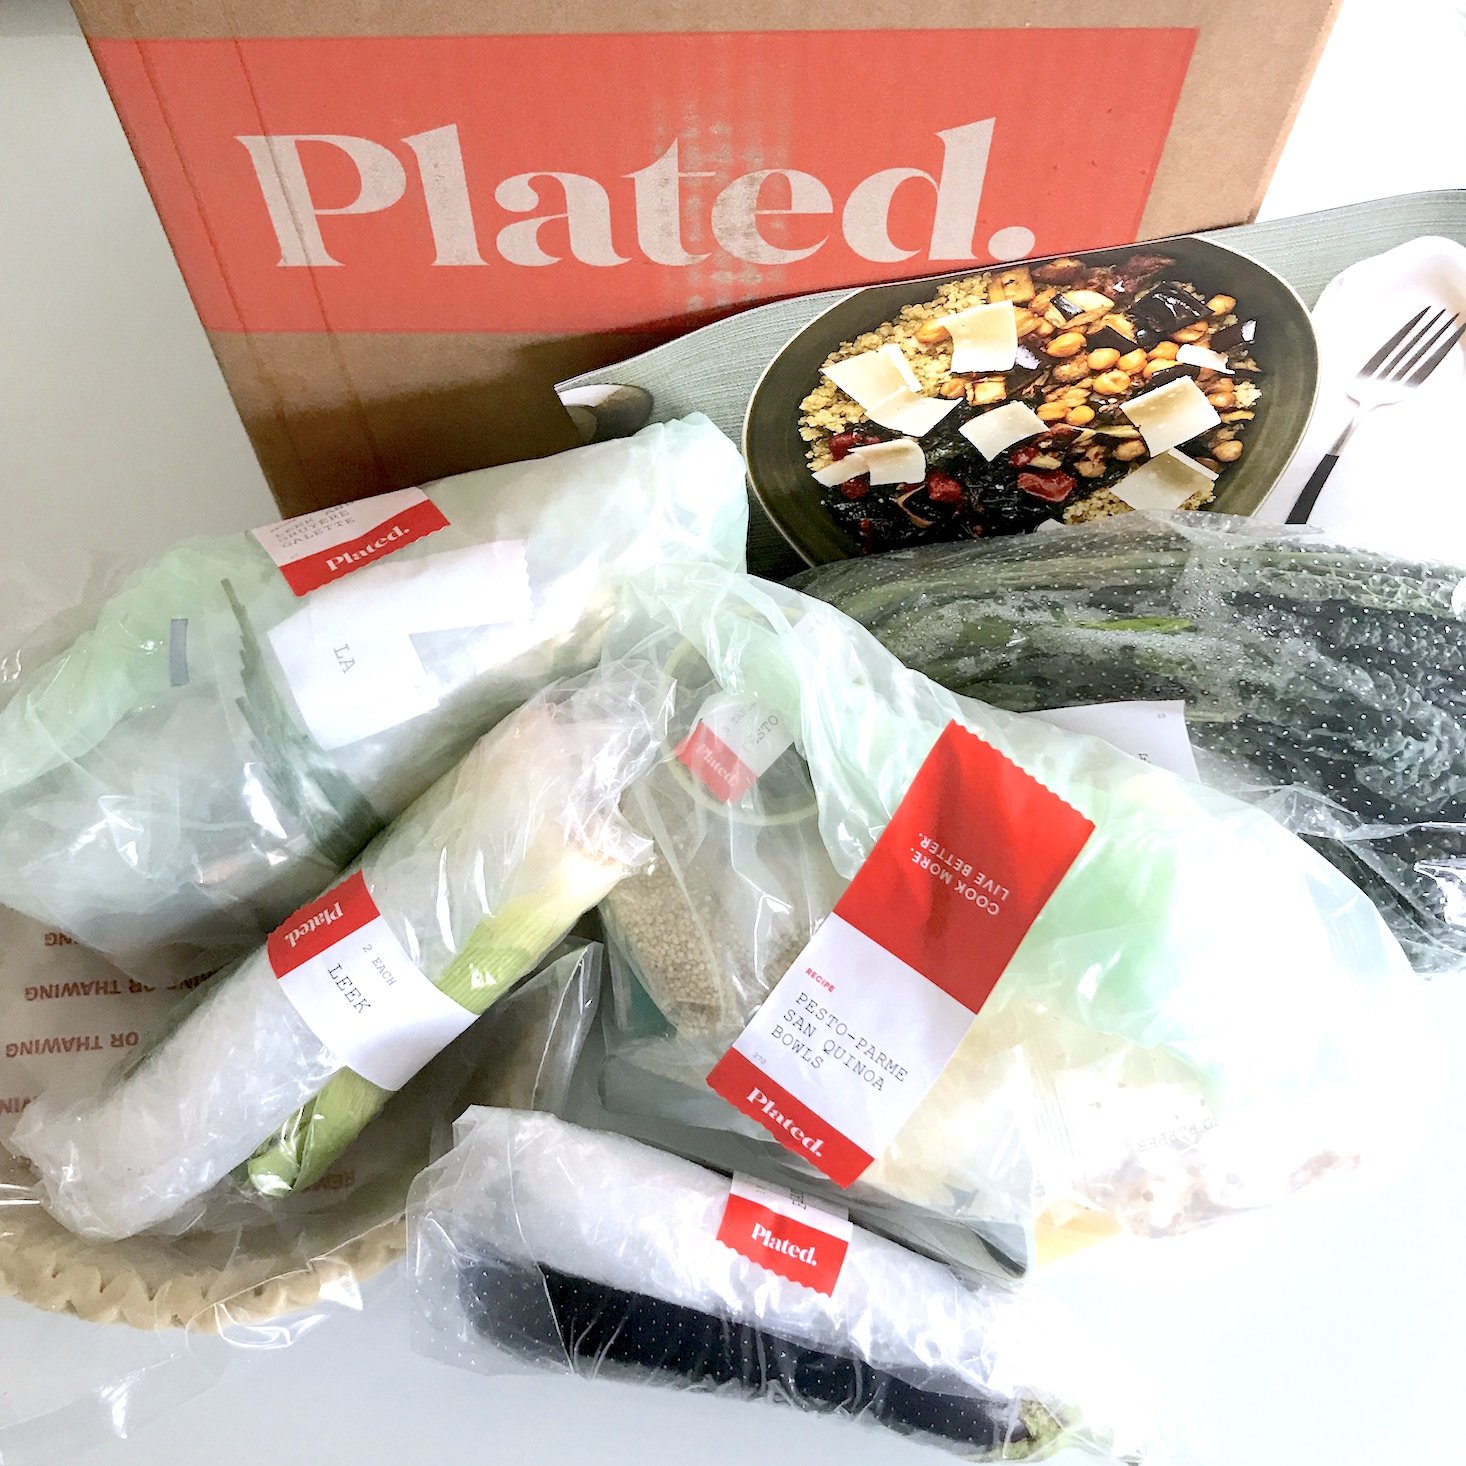 Plated March 2018 - all items